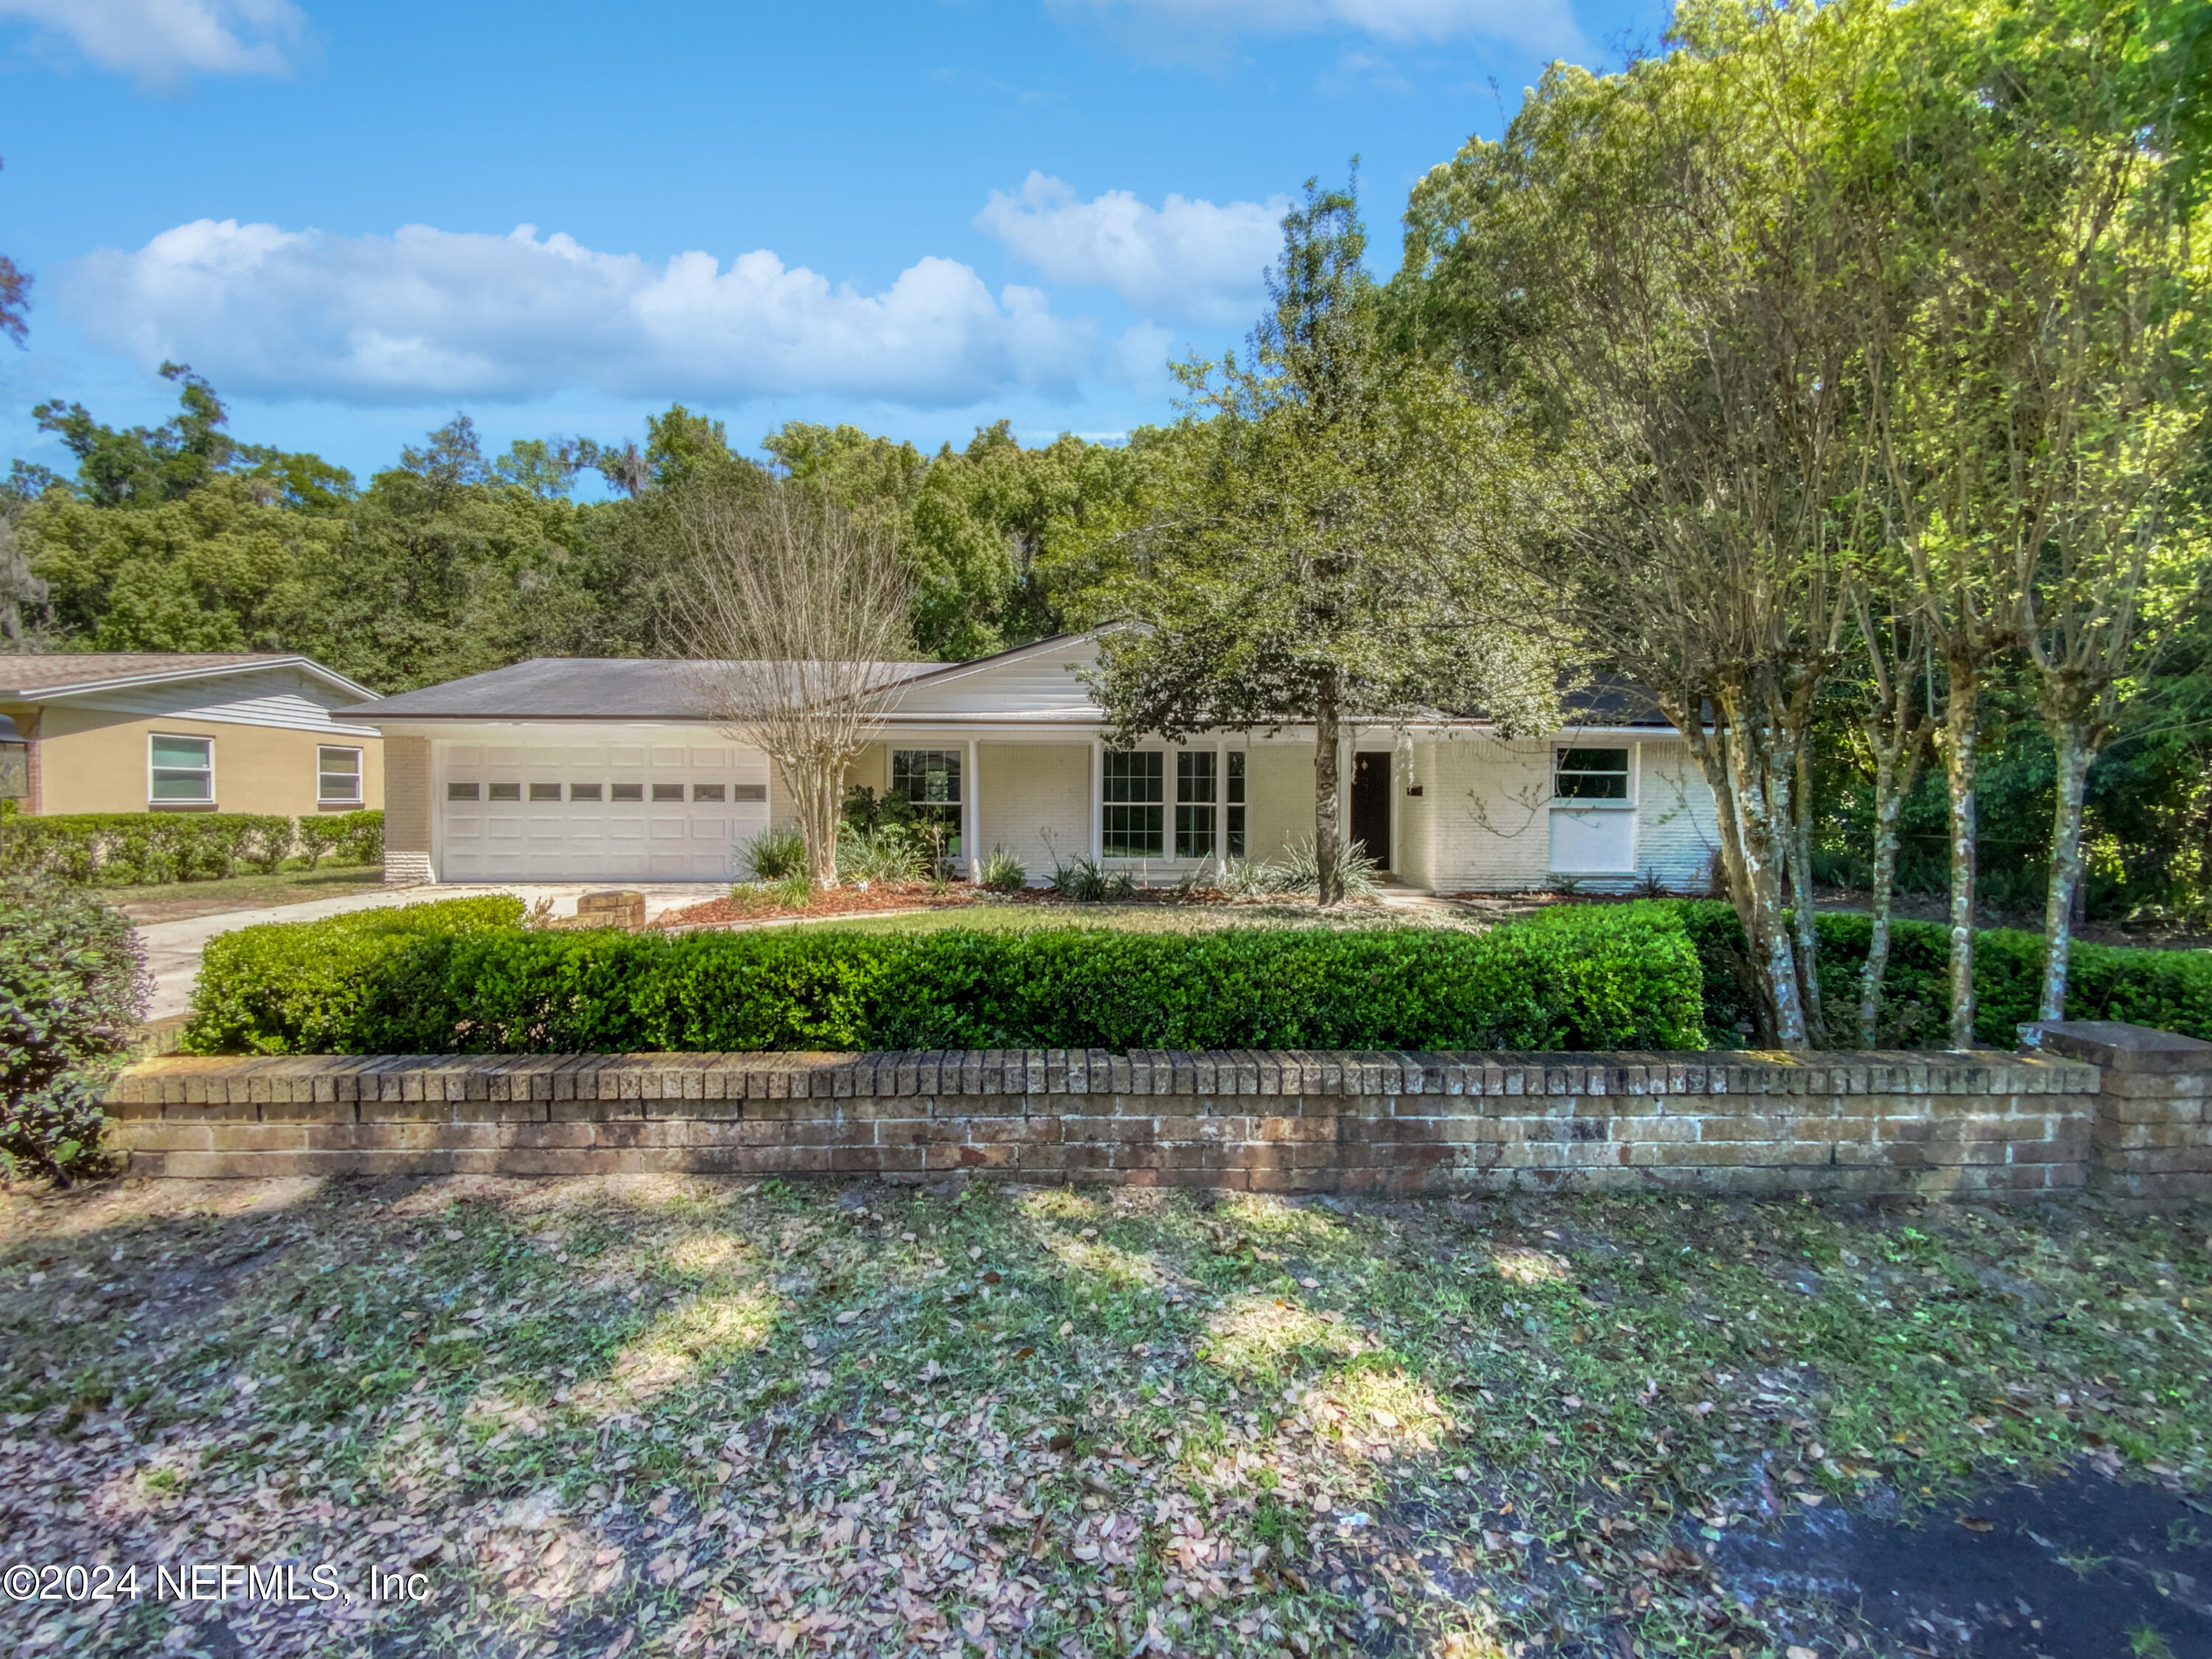 Jacksonville, FL home for sale located at 1835 RANKIN Drive, Jacksonville, FL 32207